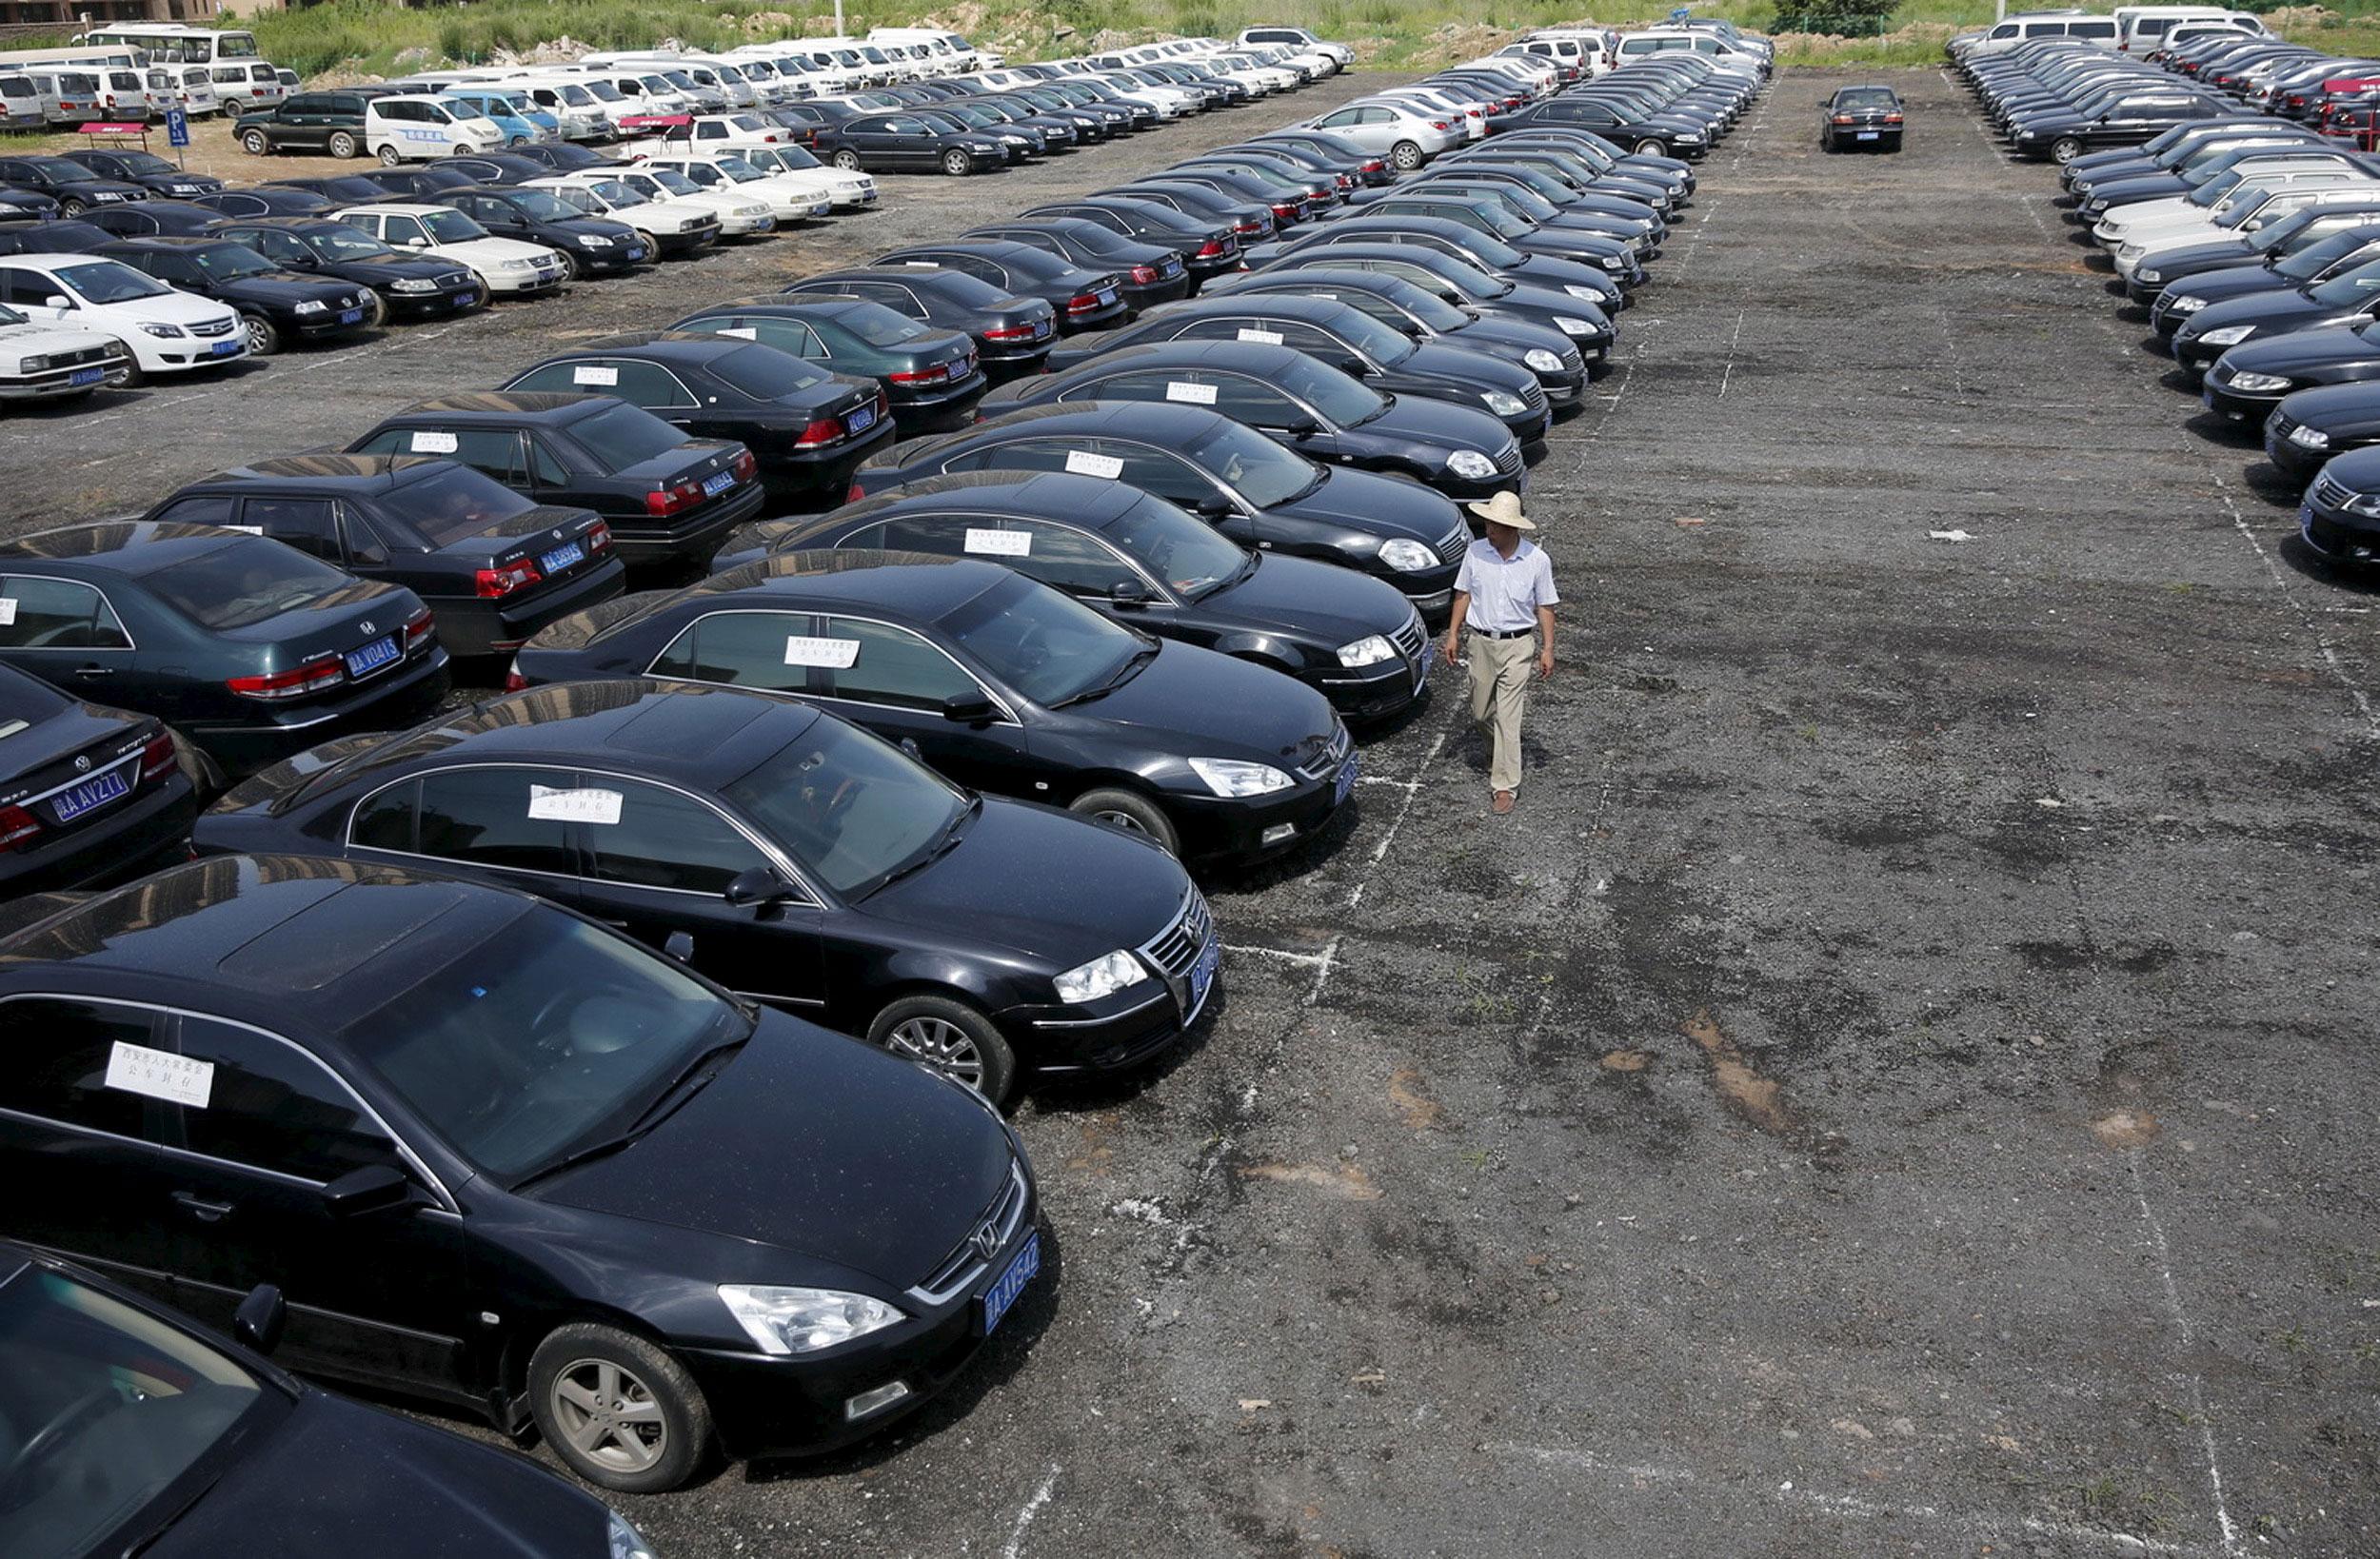 Domestic car sales growth accelerates with close to 18% rise in July